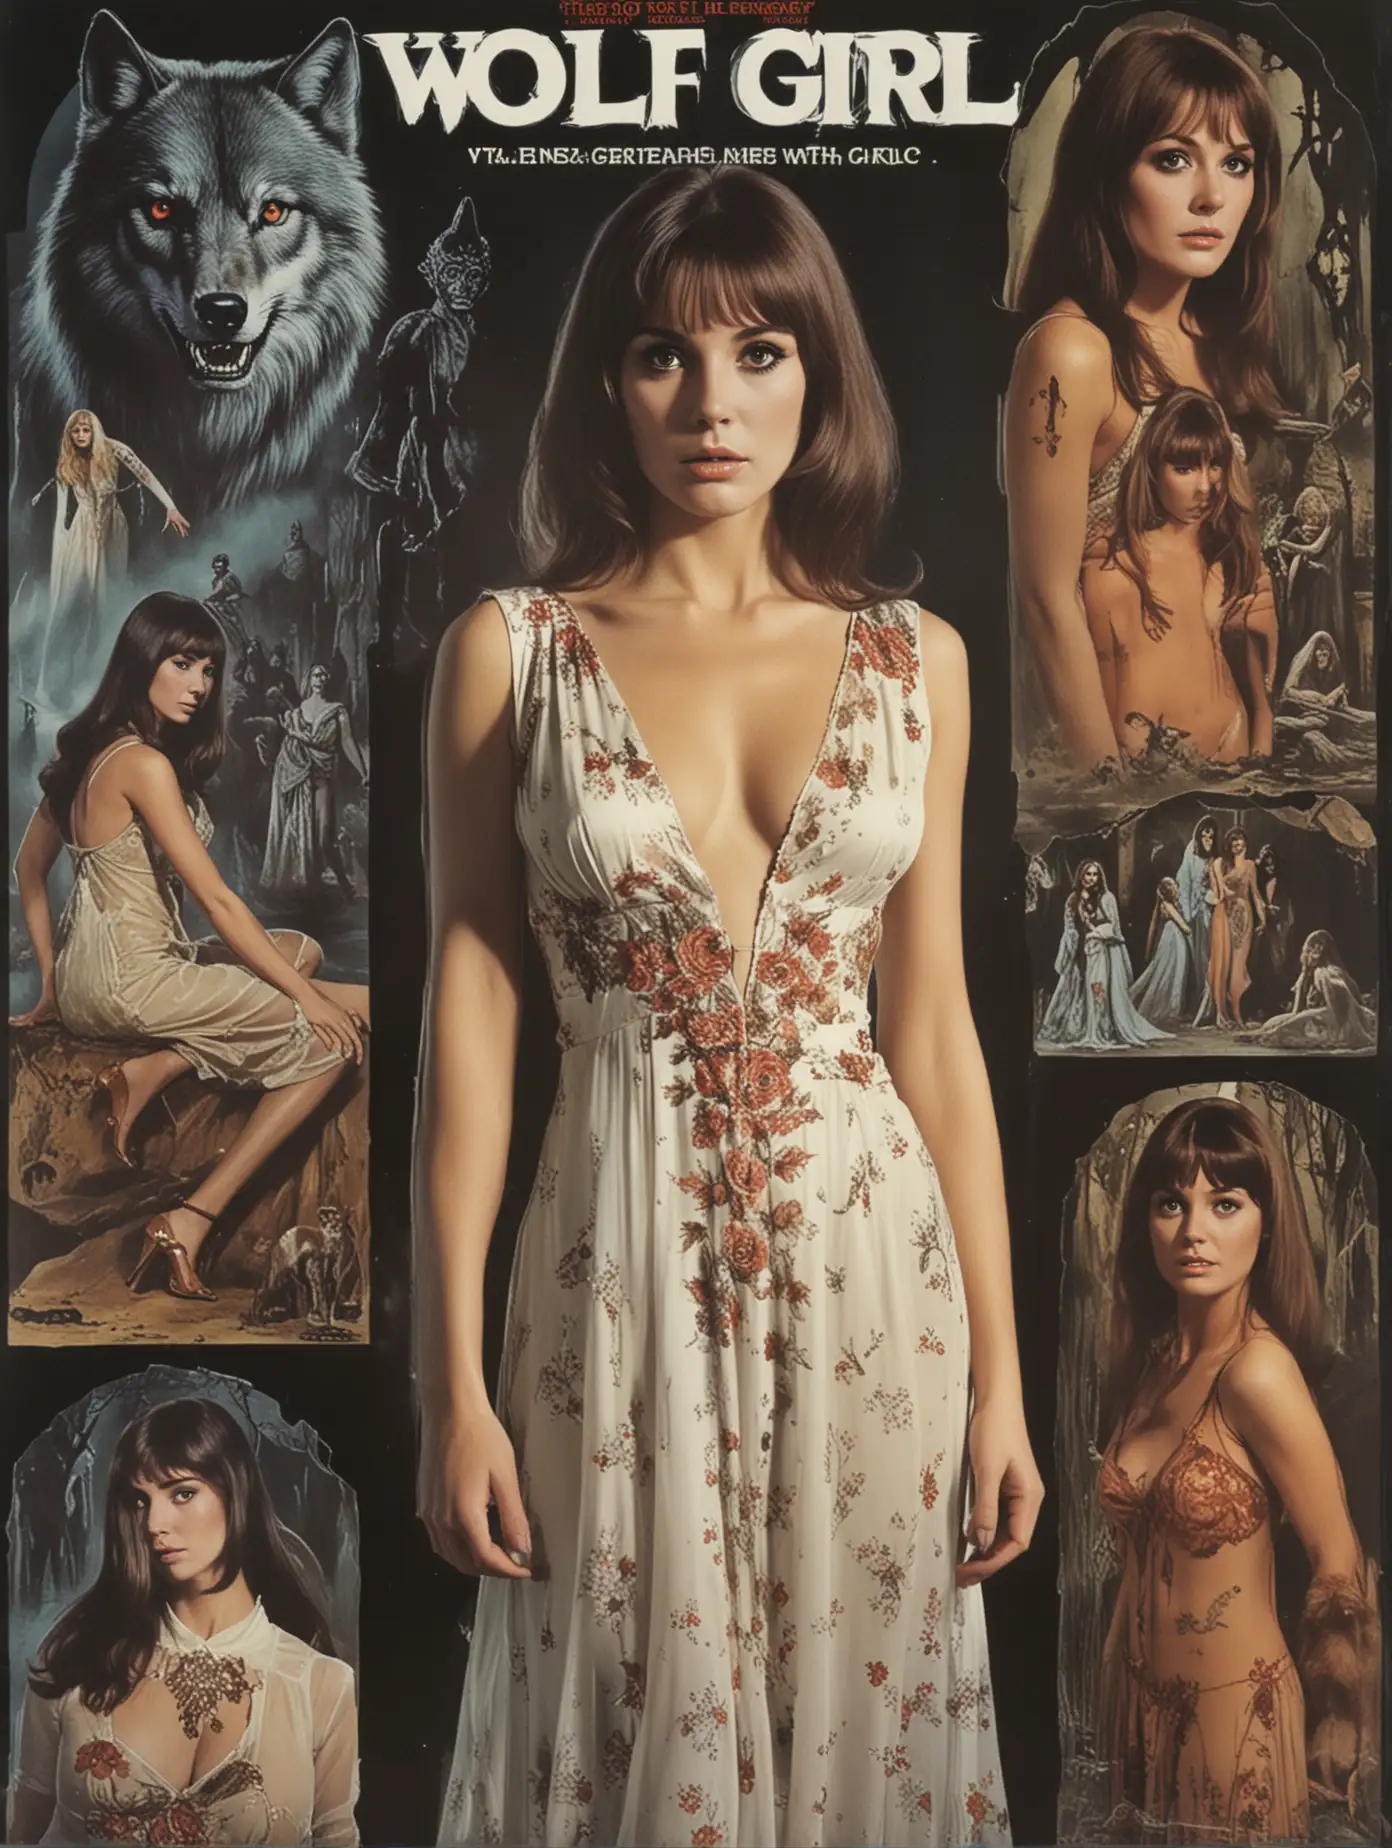 film poster for a 1970s British horror film called Wolf Girl, with collage image composition, showing various characters and scenes, film starting Christopher Lee, and sensual actress in low-cut gown, gaudy pulp style, patina somewhat worn